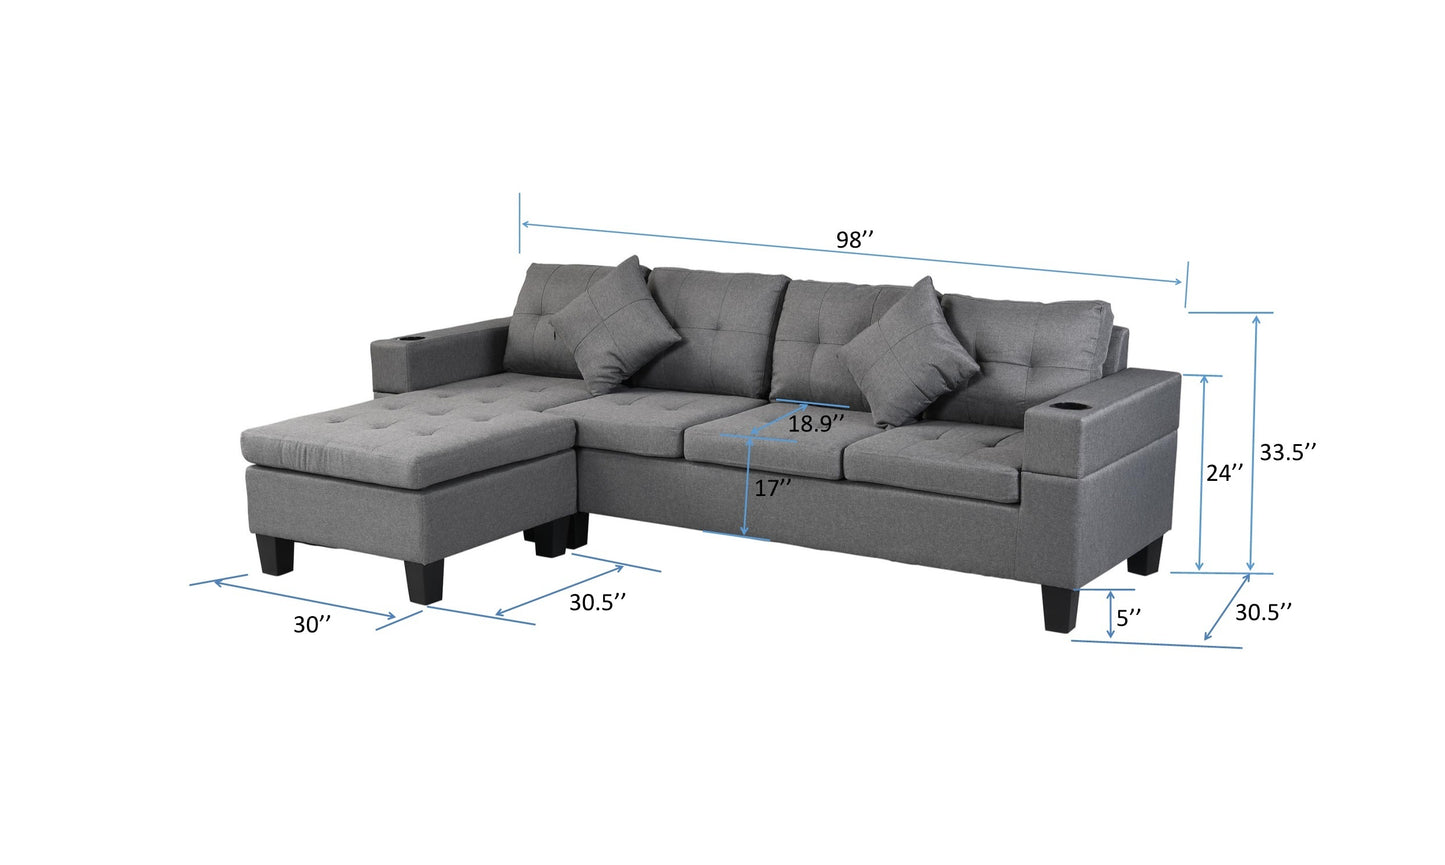 Sectional Sofa Set for Living Room with L Shape  Chaise Lounge ,cup holder and  Left or Right Hand Chaise  Modern 4 Seat